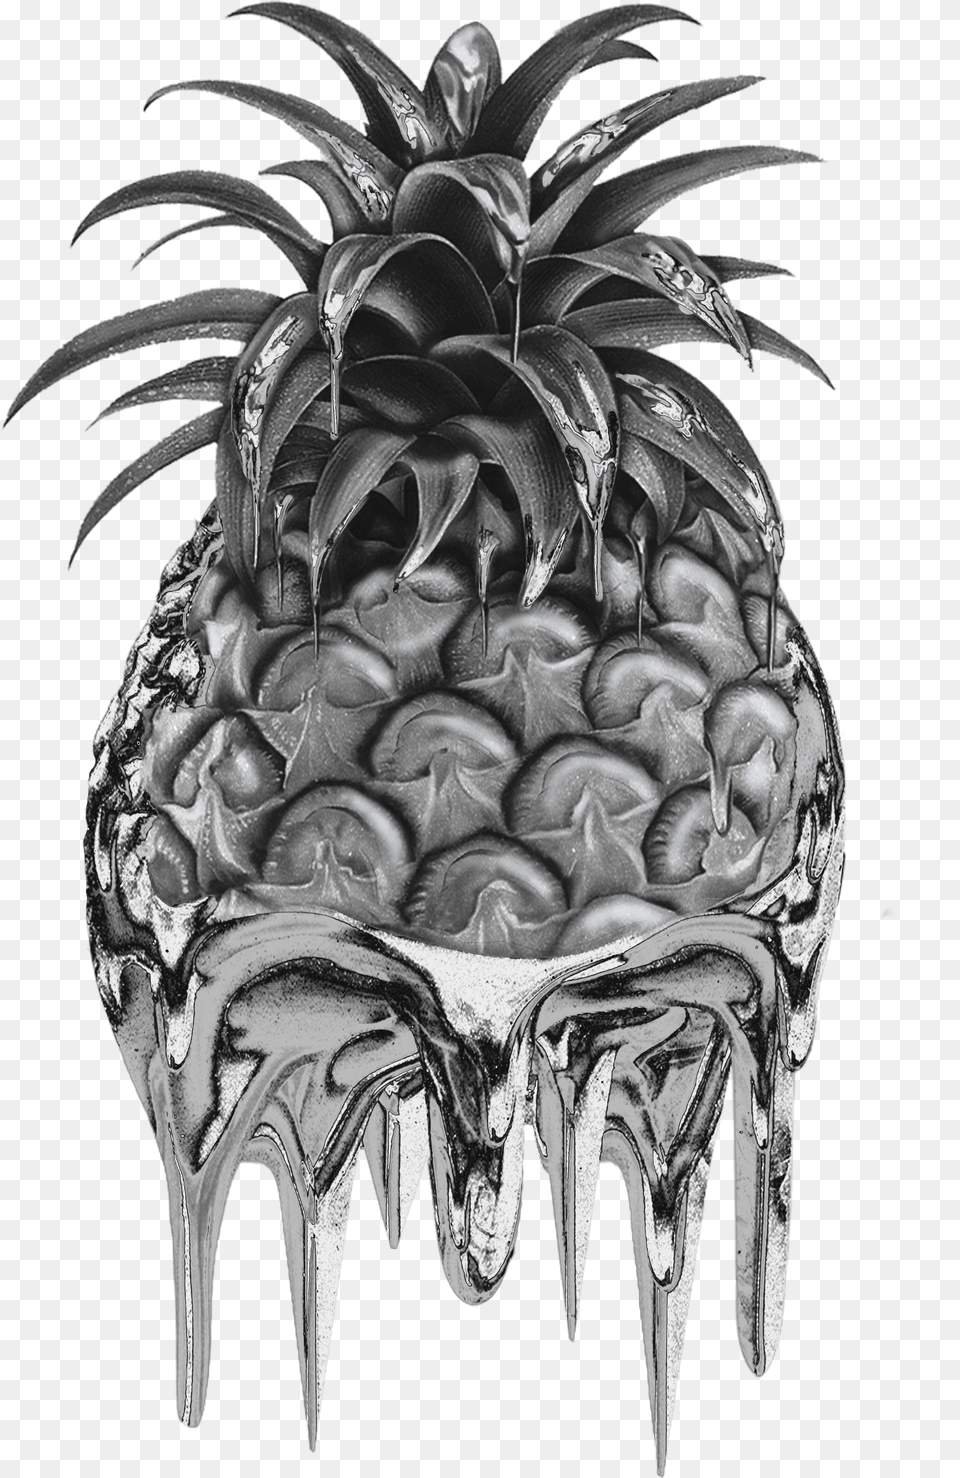 Stay Gold Silver Chrome Drip Pineapple Fruits, Food, Fruit, Plant, Produce Png Image